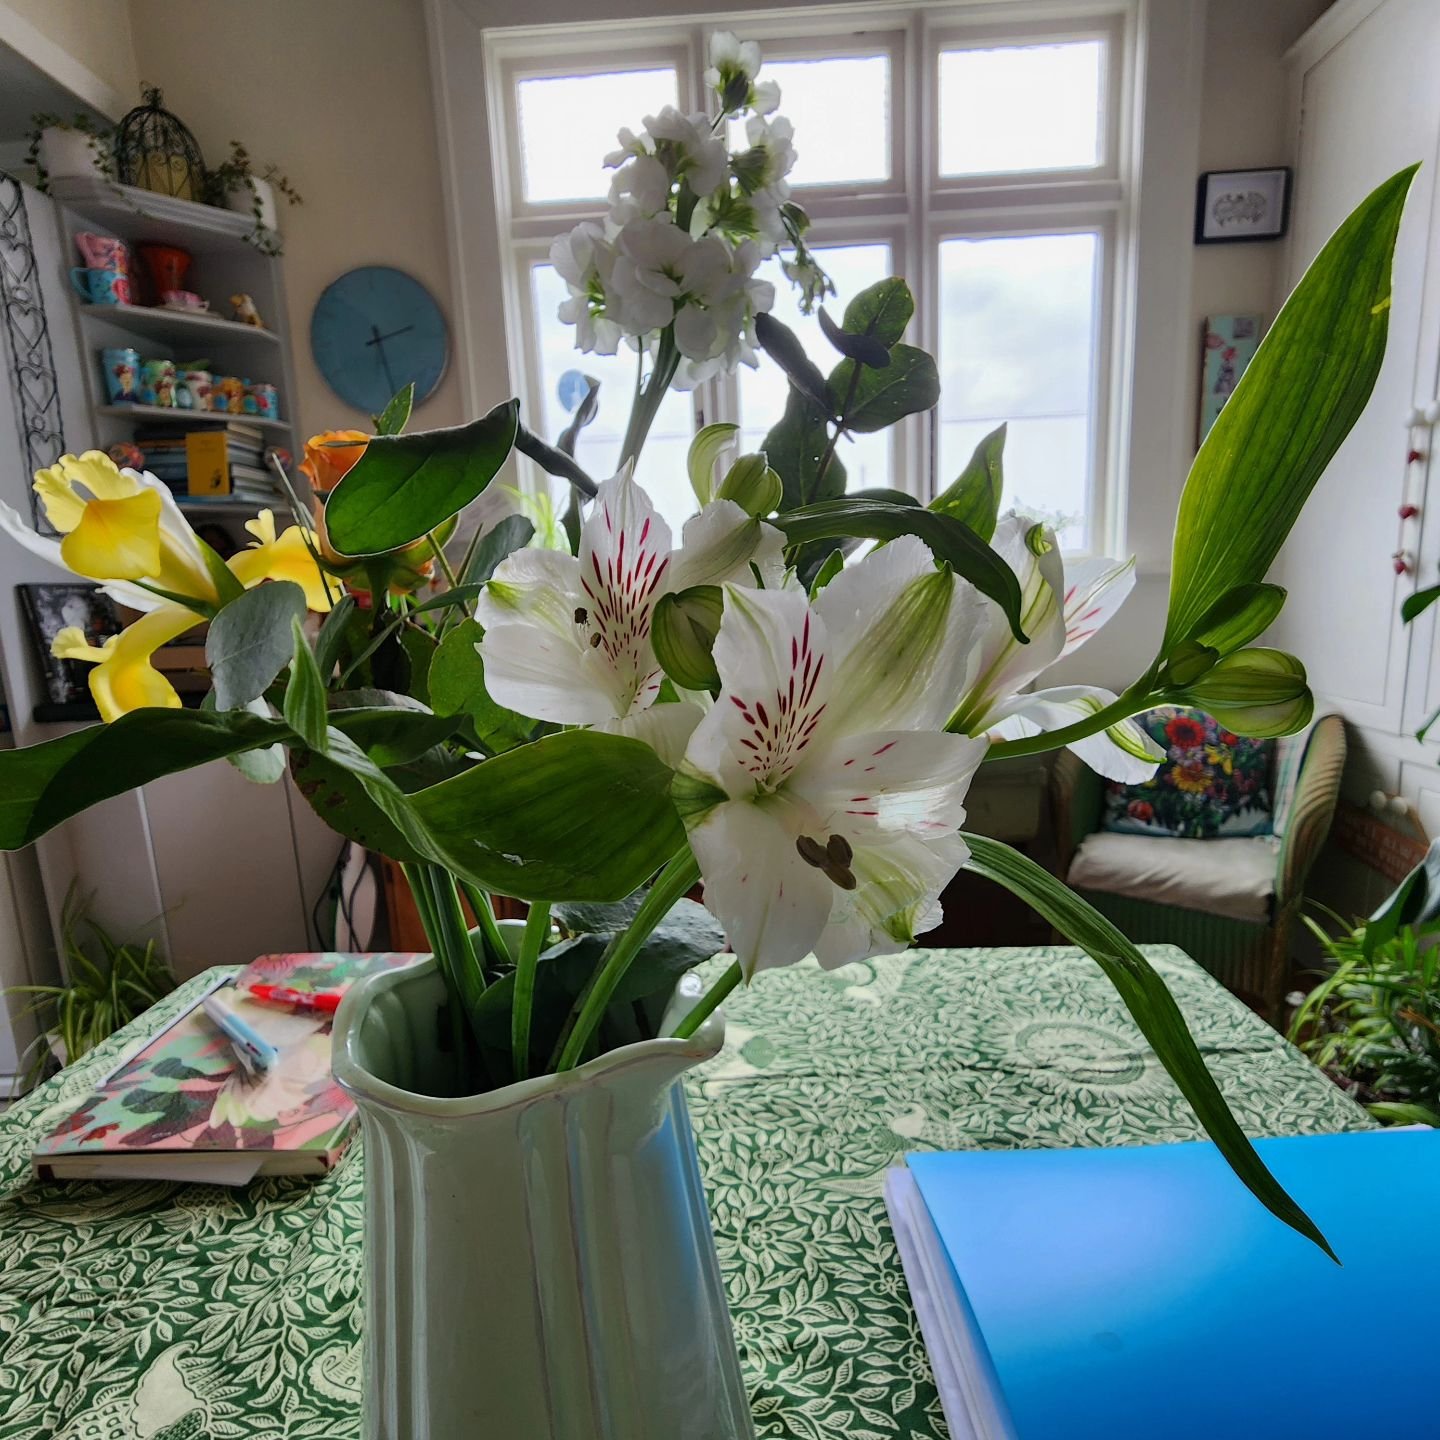 Isn't it funny how a fresh bunch of flowers, or a lovely new pot plant, can motivate us to make our space better for them?  And doesn't it feel good when we do!
The tide of things to-do/read/bin/share/file/store on my dining table ebbs and flows, dri